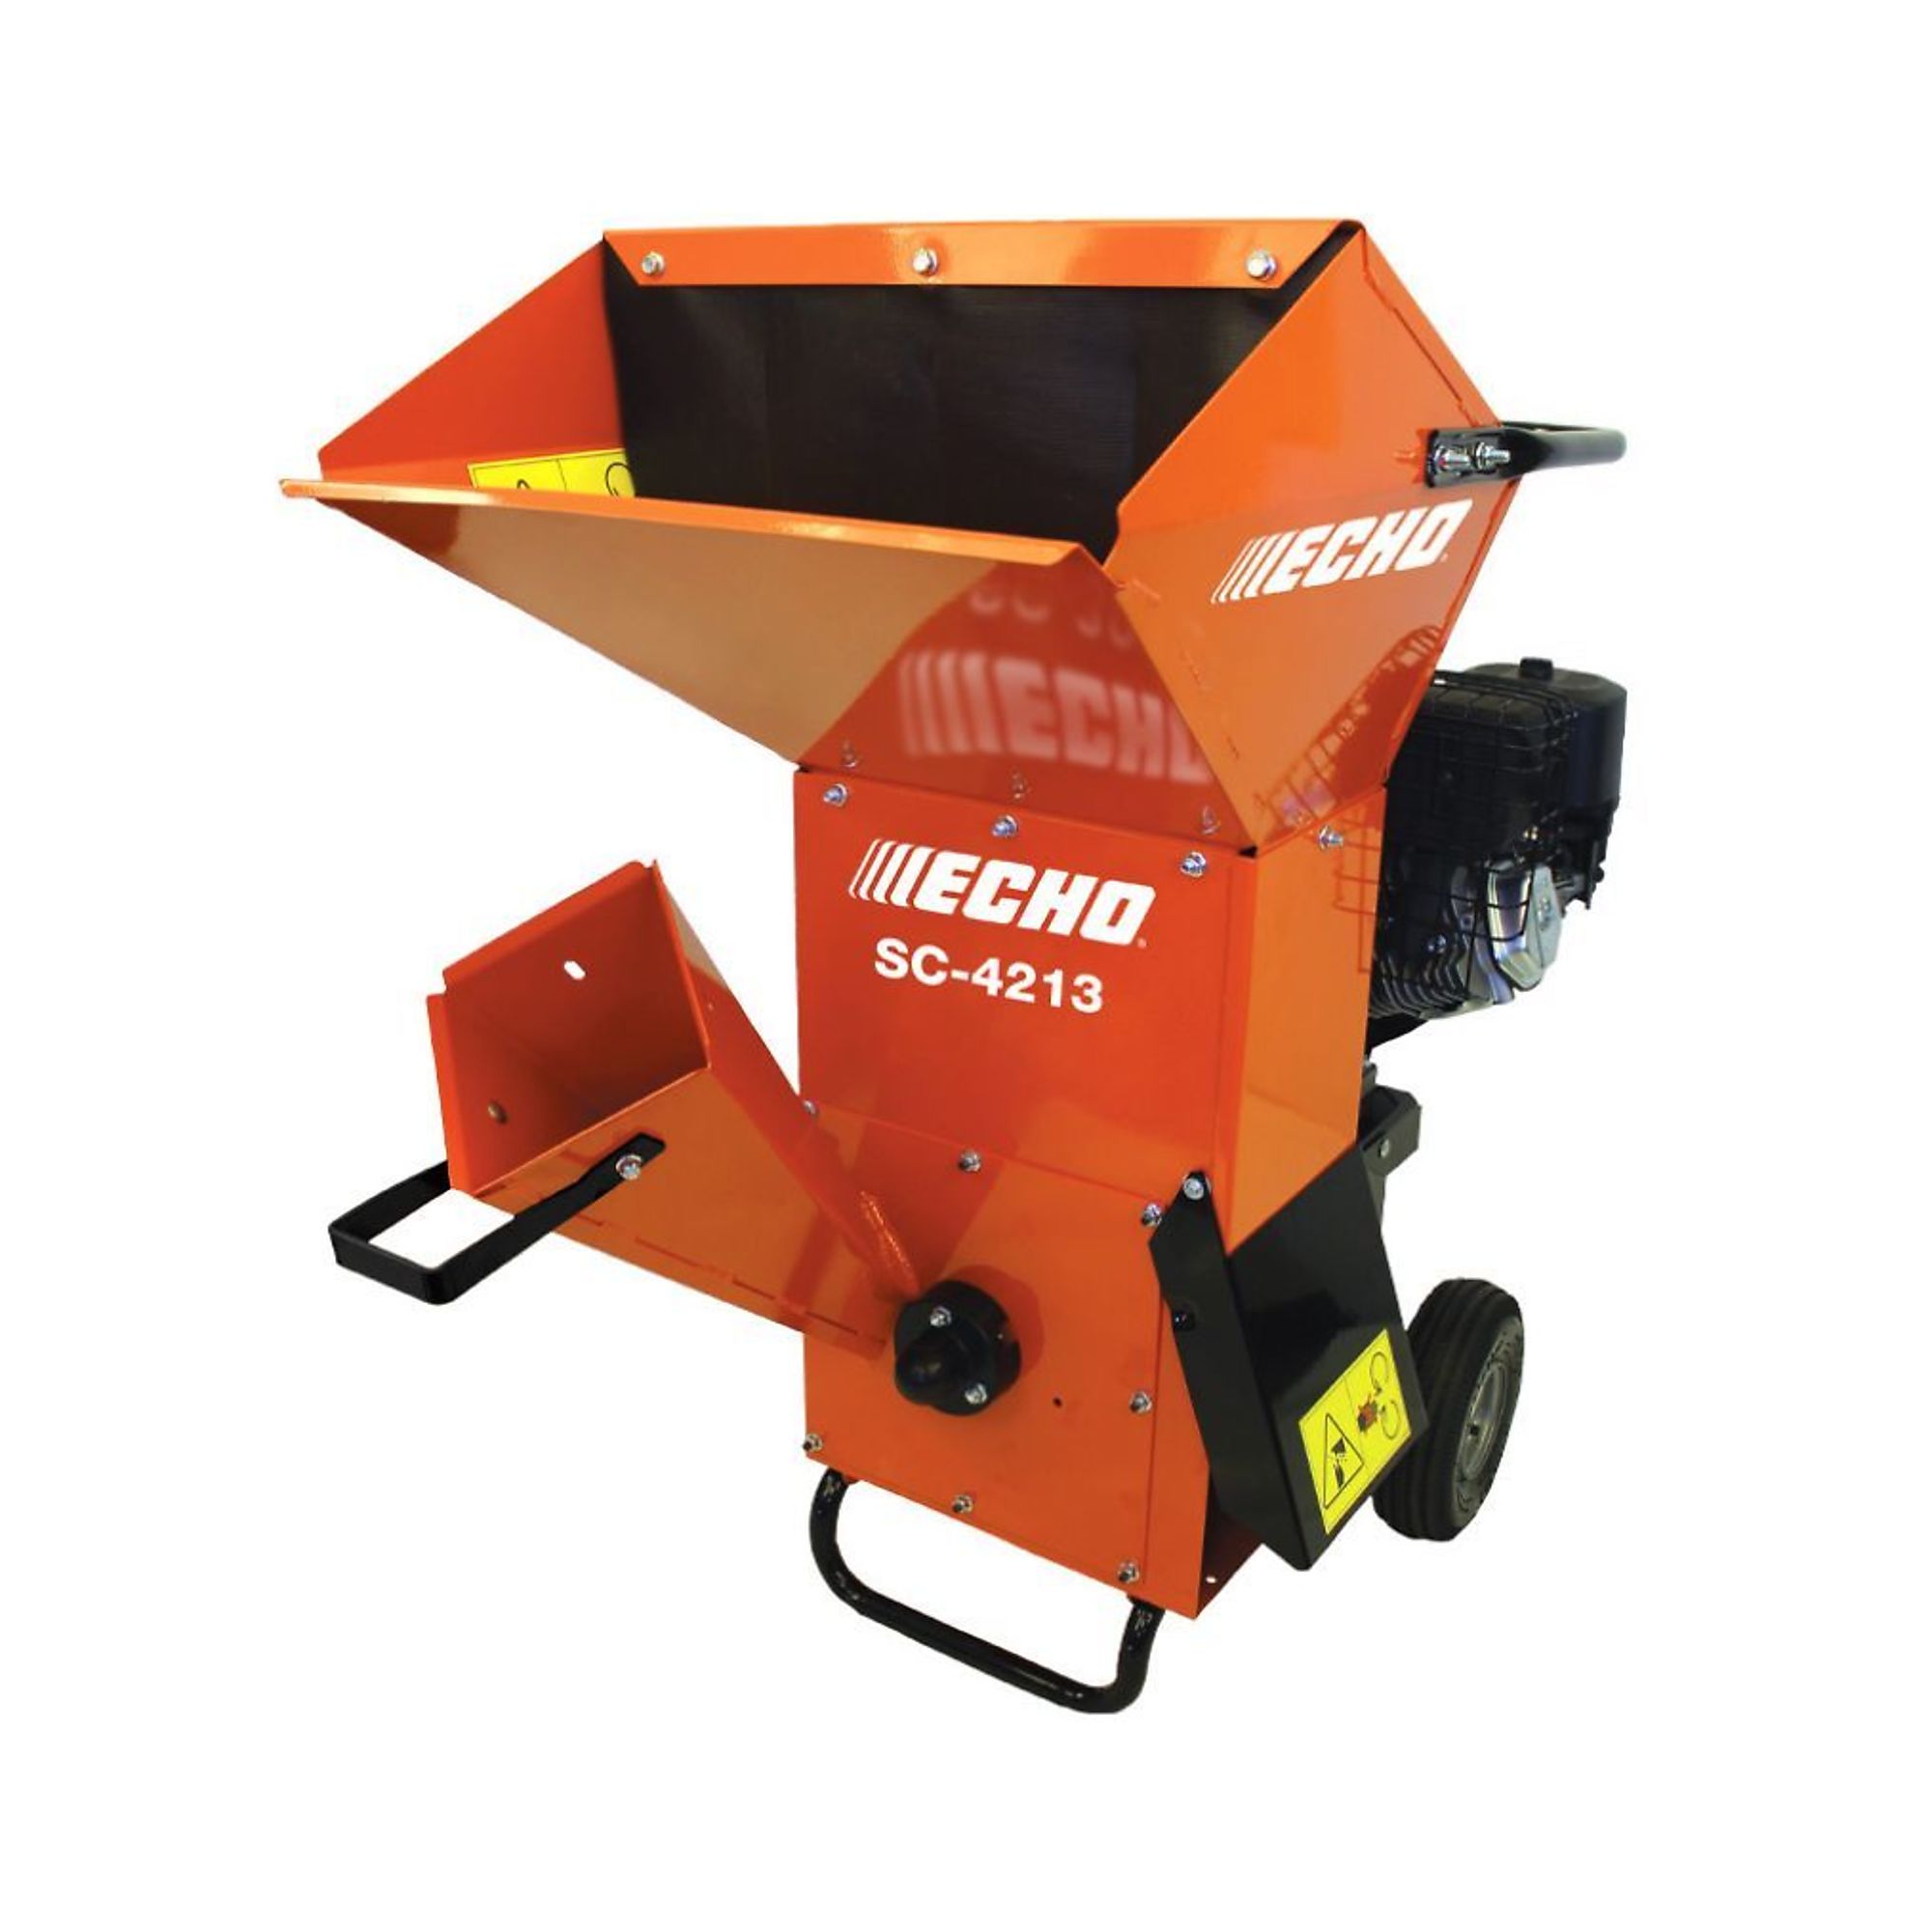 ECHO, Wood Chipper/Shredder, Engine Displacement 420 cc, Max. Cutting Thickness 3 in, Model SC-4213